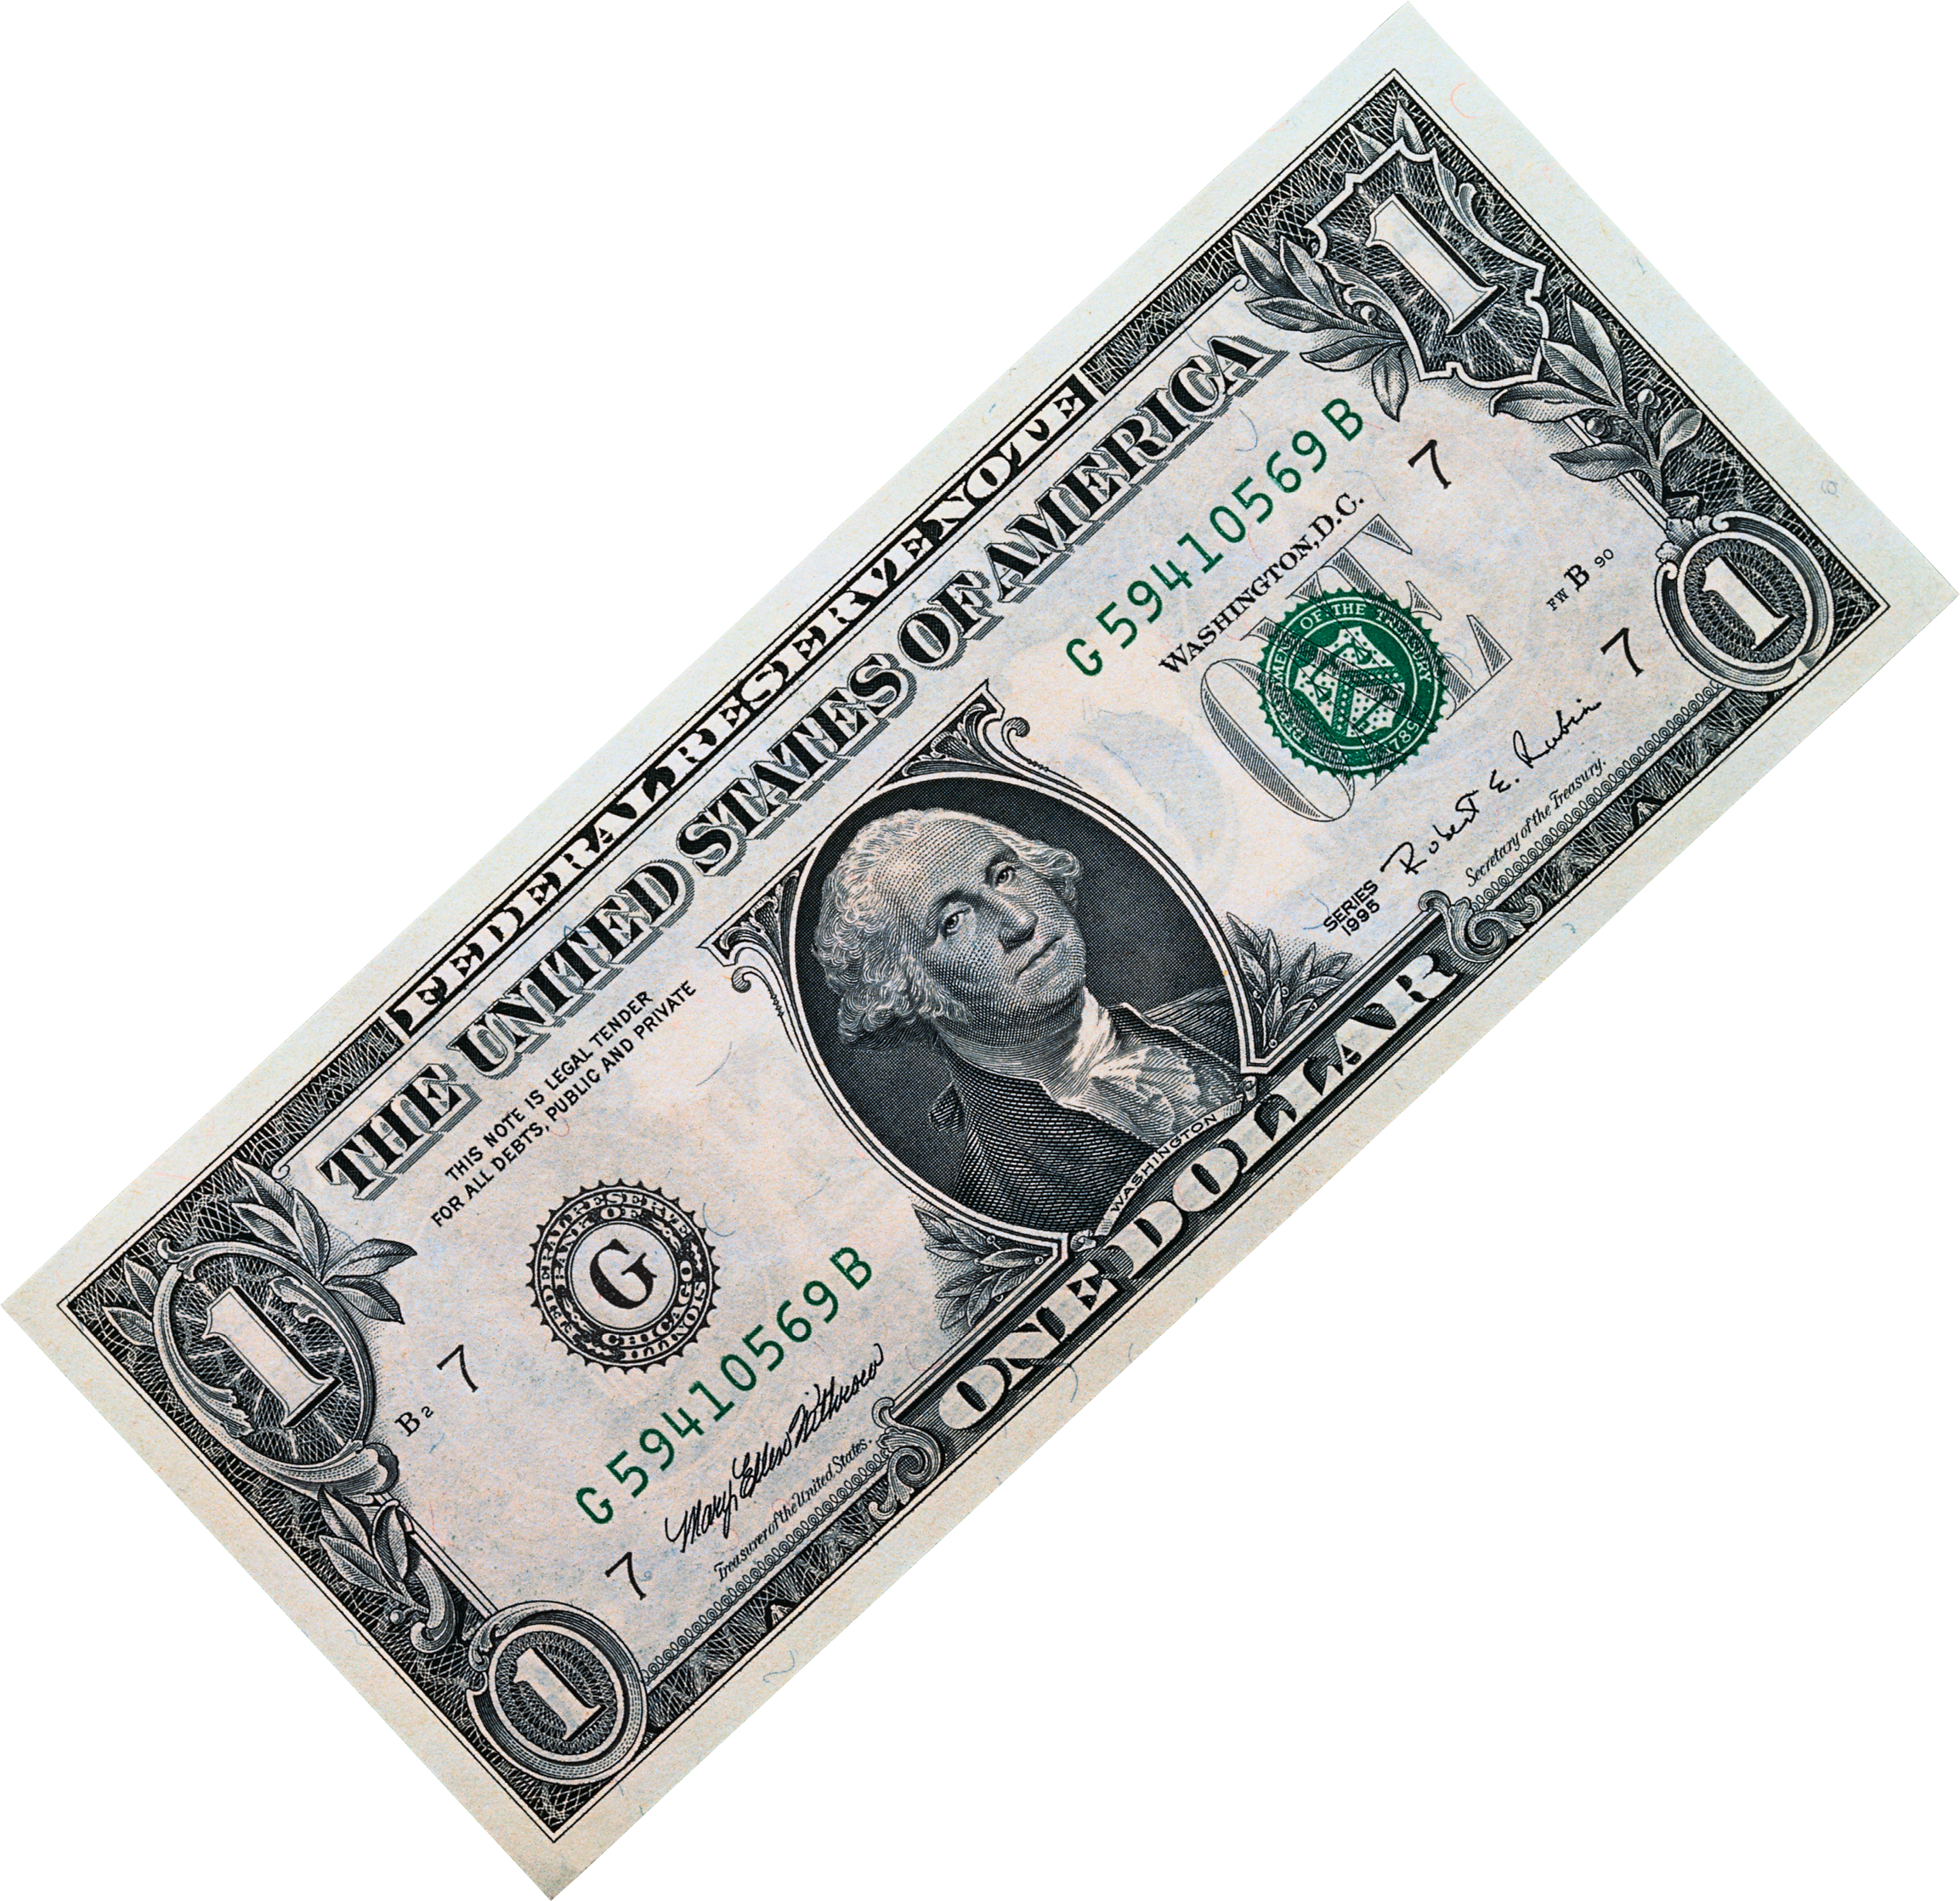 Image free pictures download. Money png